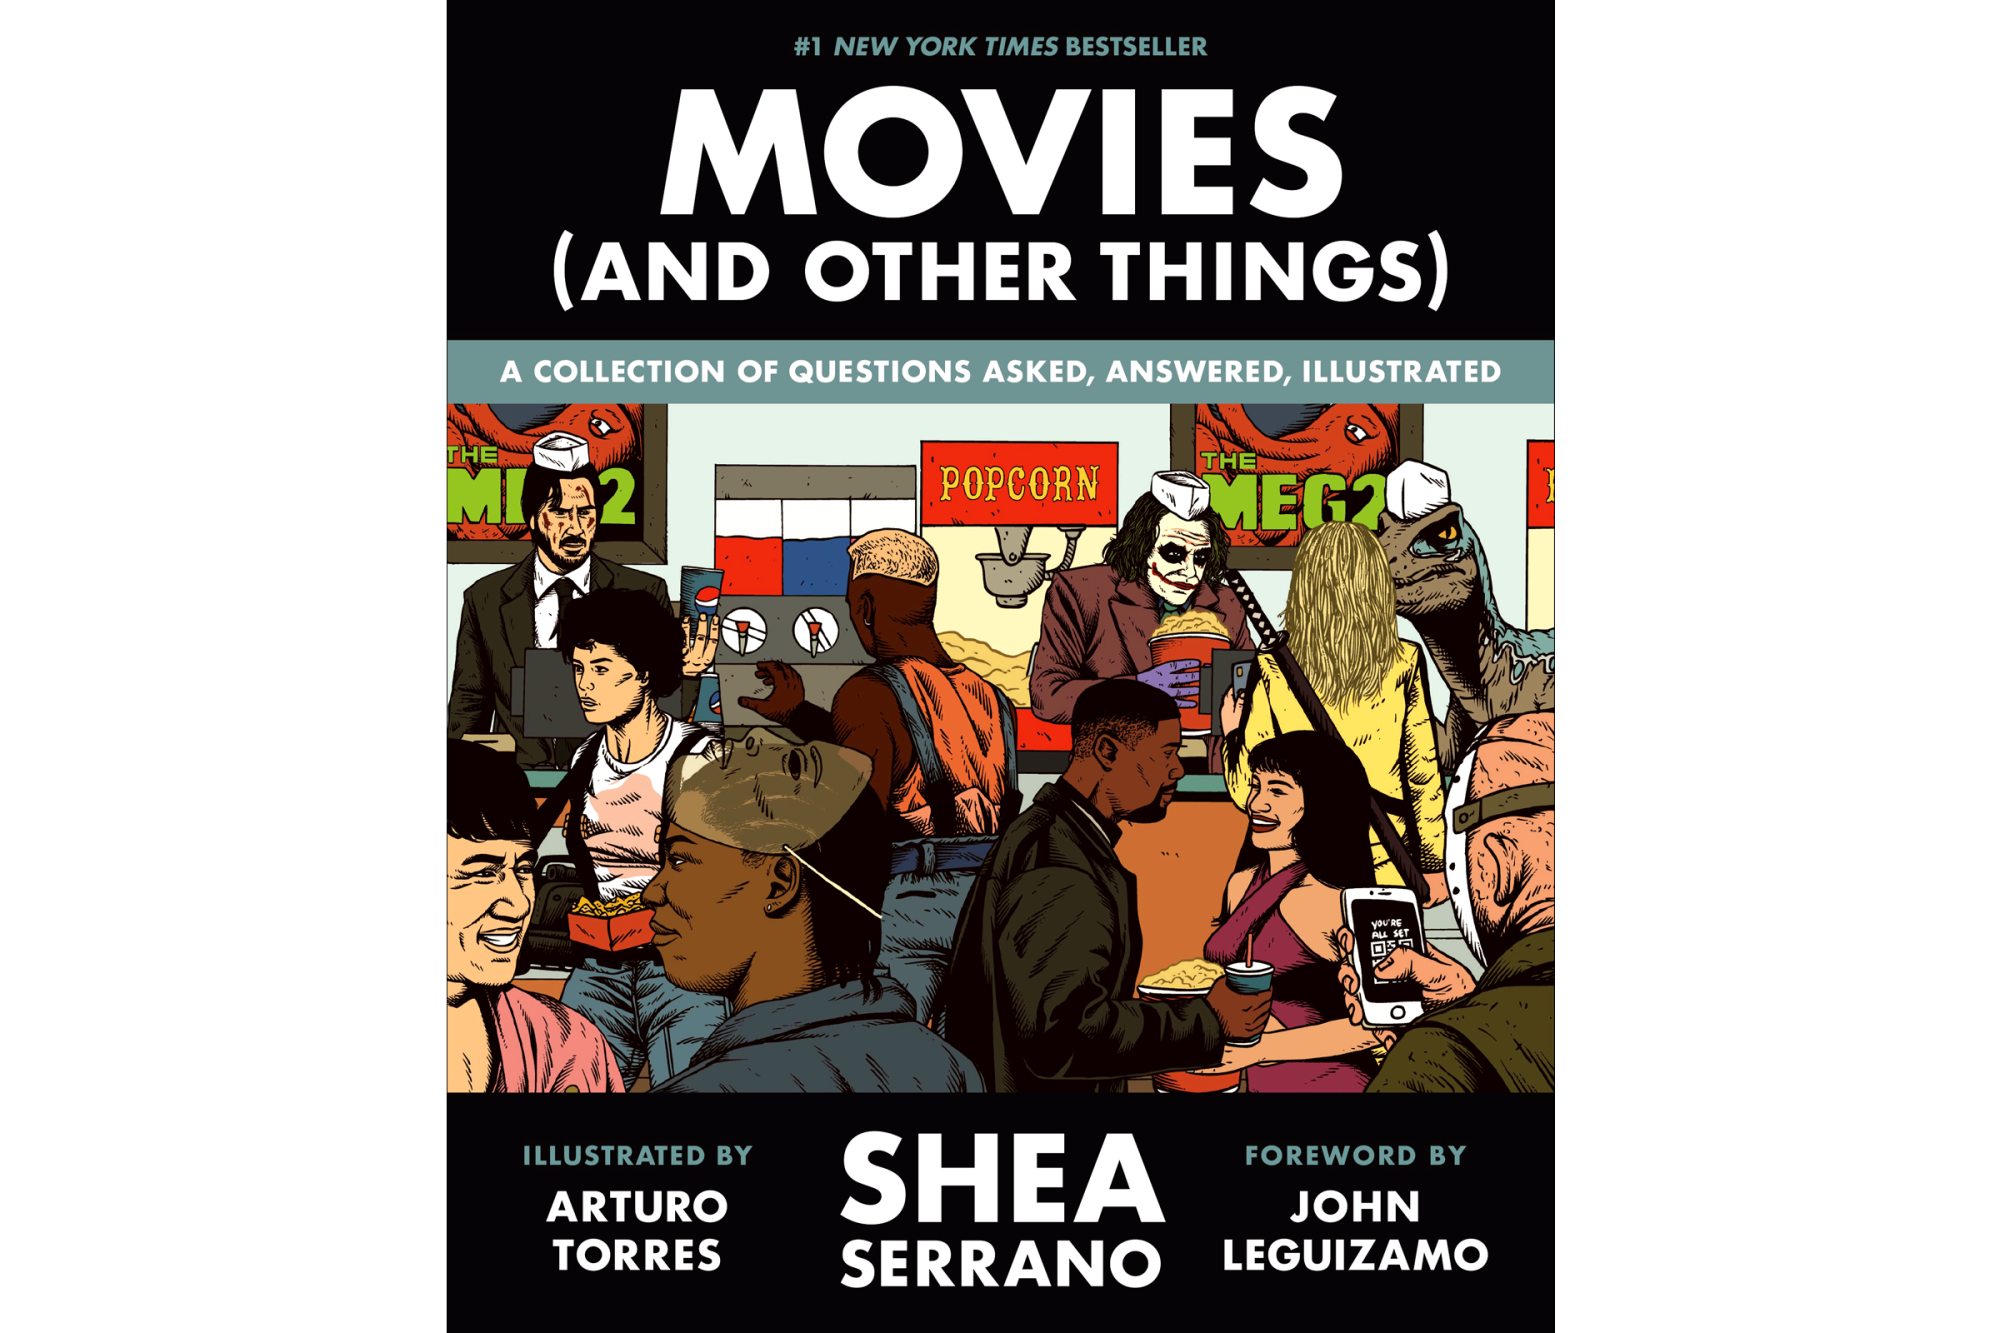 "Movies (And Other Things)" by Shea Serrano